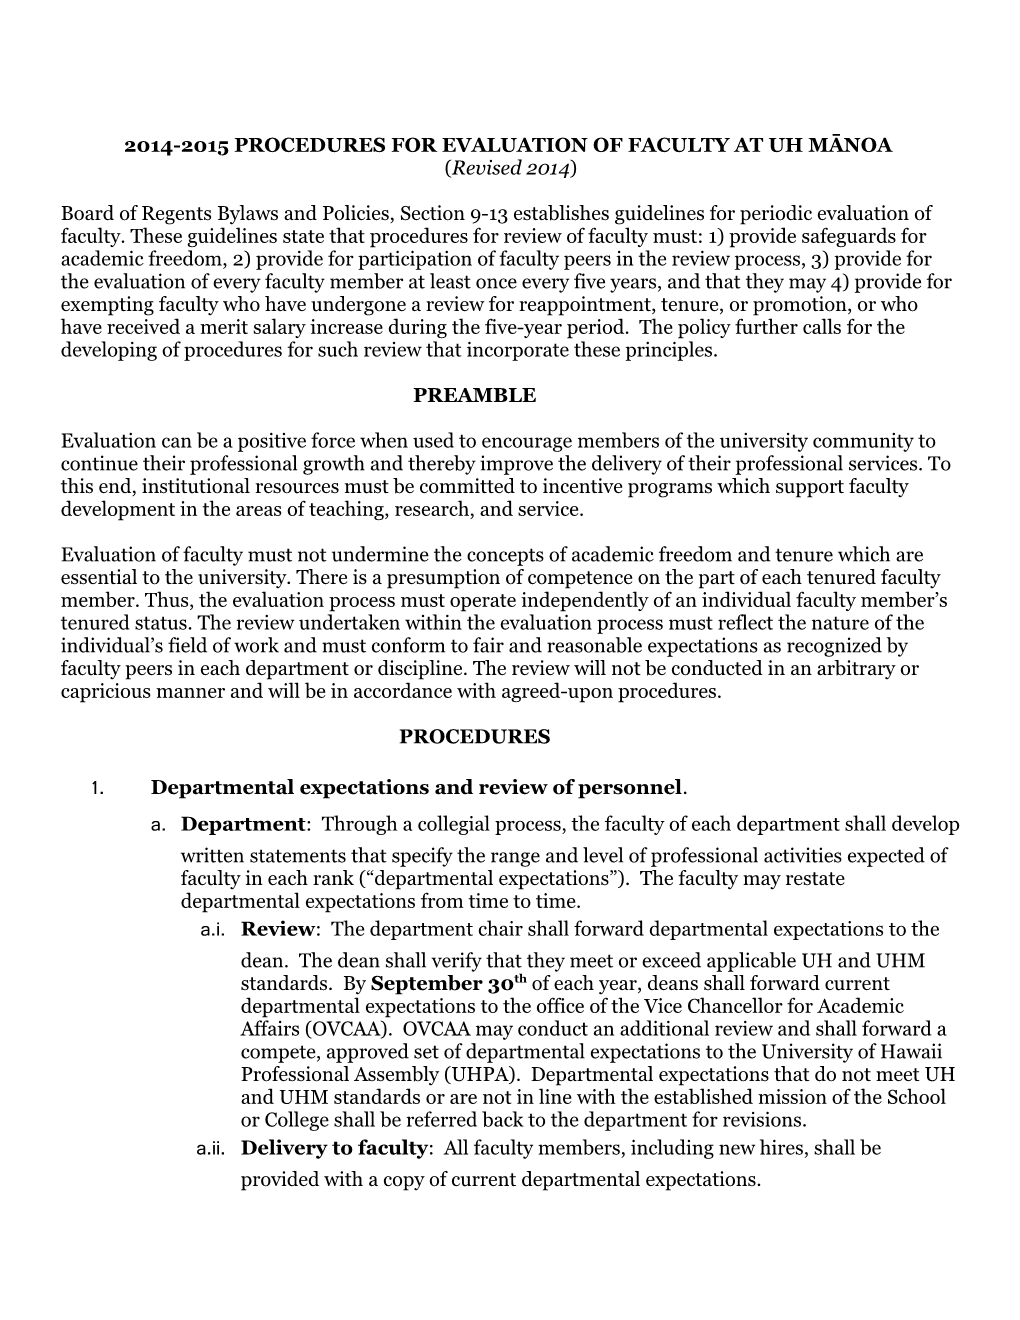 2007-2008 Procedures for Evaluation of Faculty at Uh M Noa